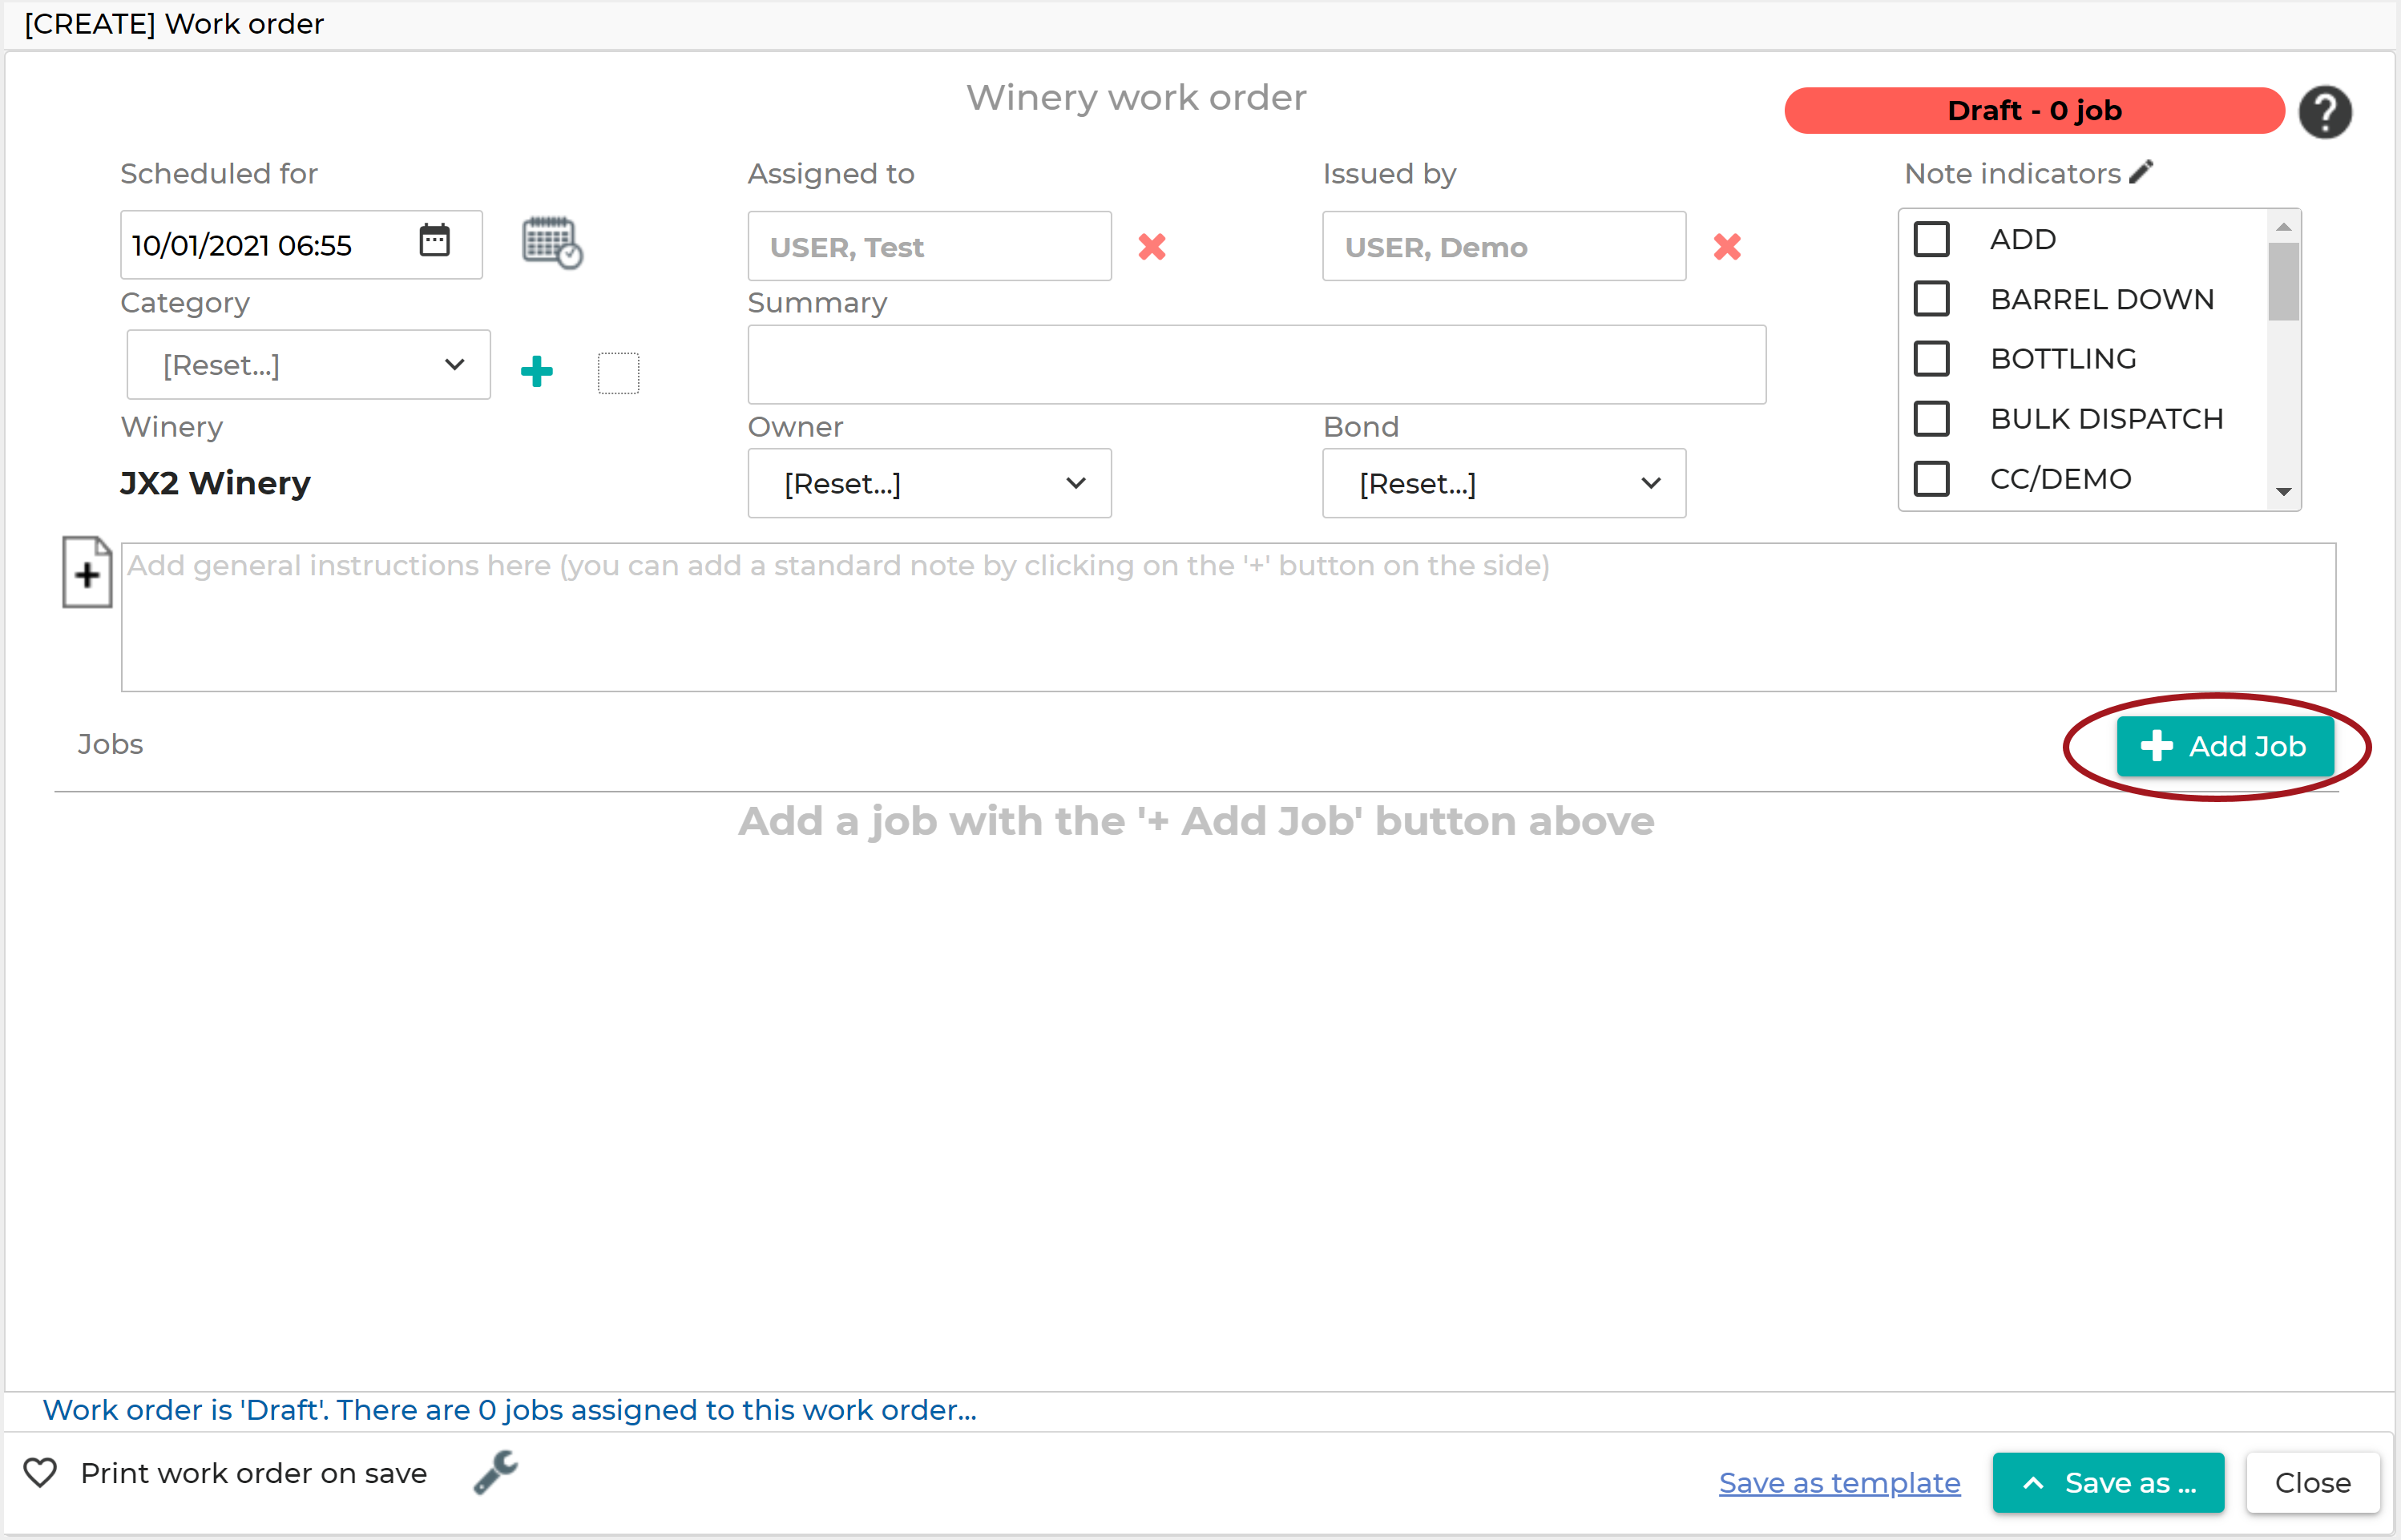 Create_Work_Order_-_Add_Job_Button_20211001.png